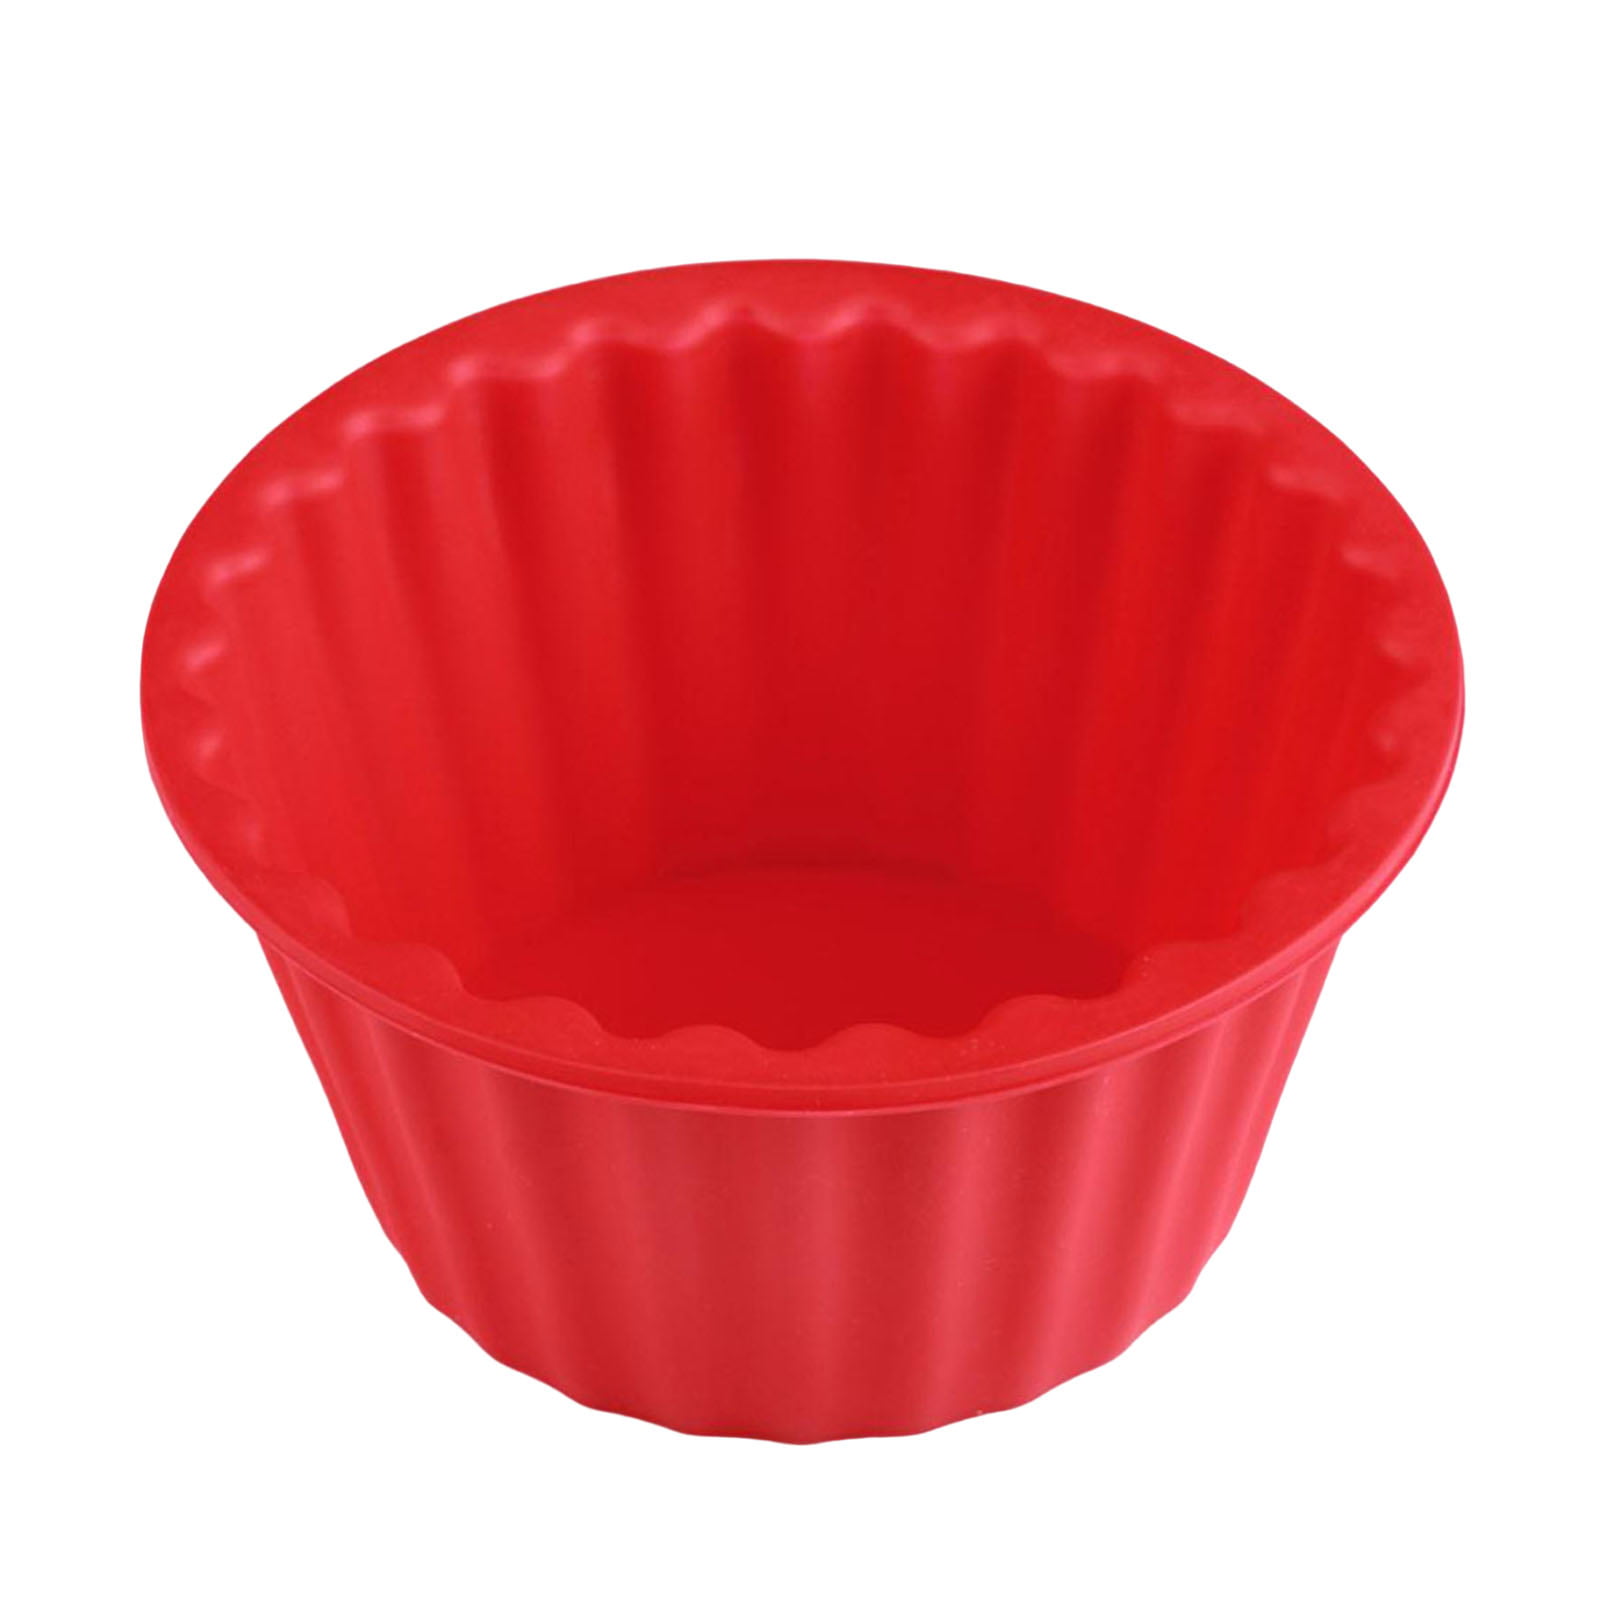 APRON HEROES - OMG Giant Cupcake Mold Pan, Baking Accessories, Cupcake  Decorating Kit, Large Cupcake Pan, Baking Molds, Large Muffin Liners,  Silicone